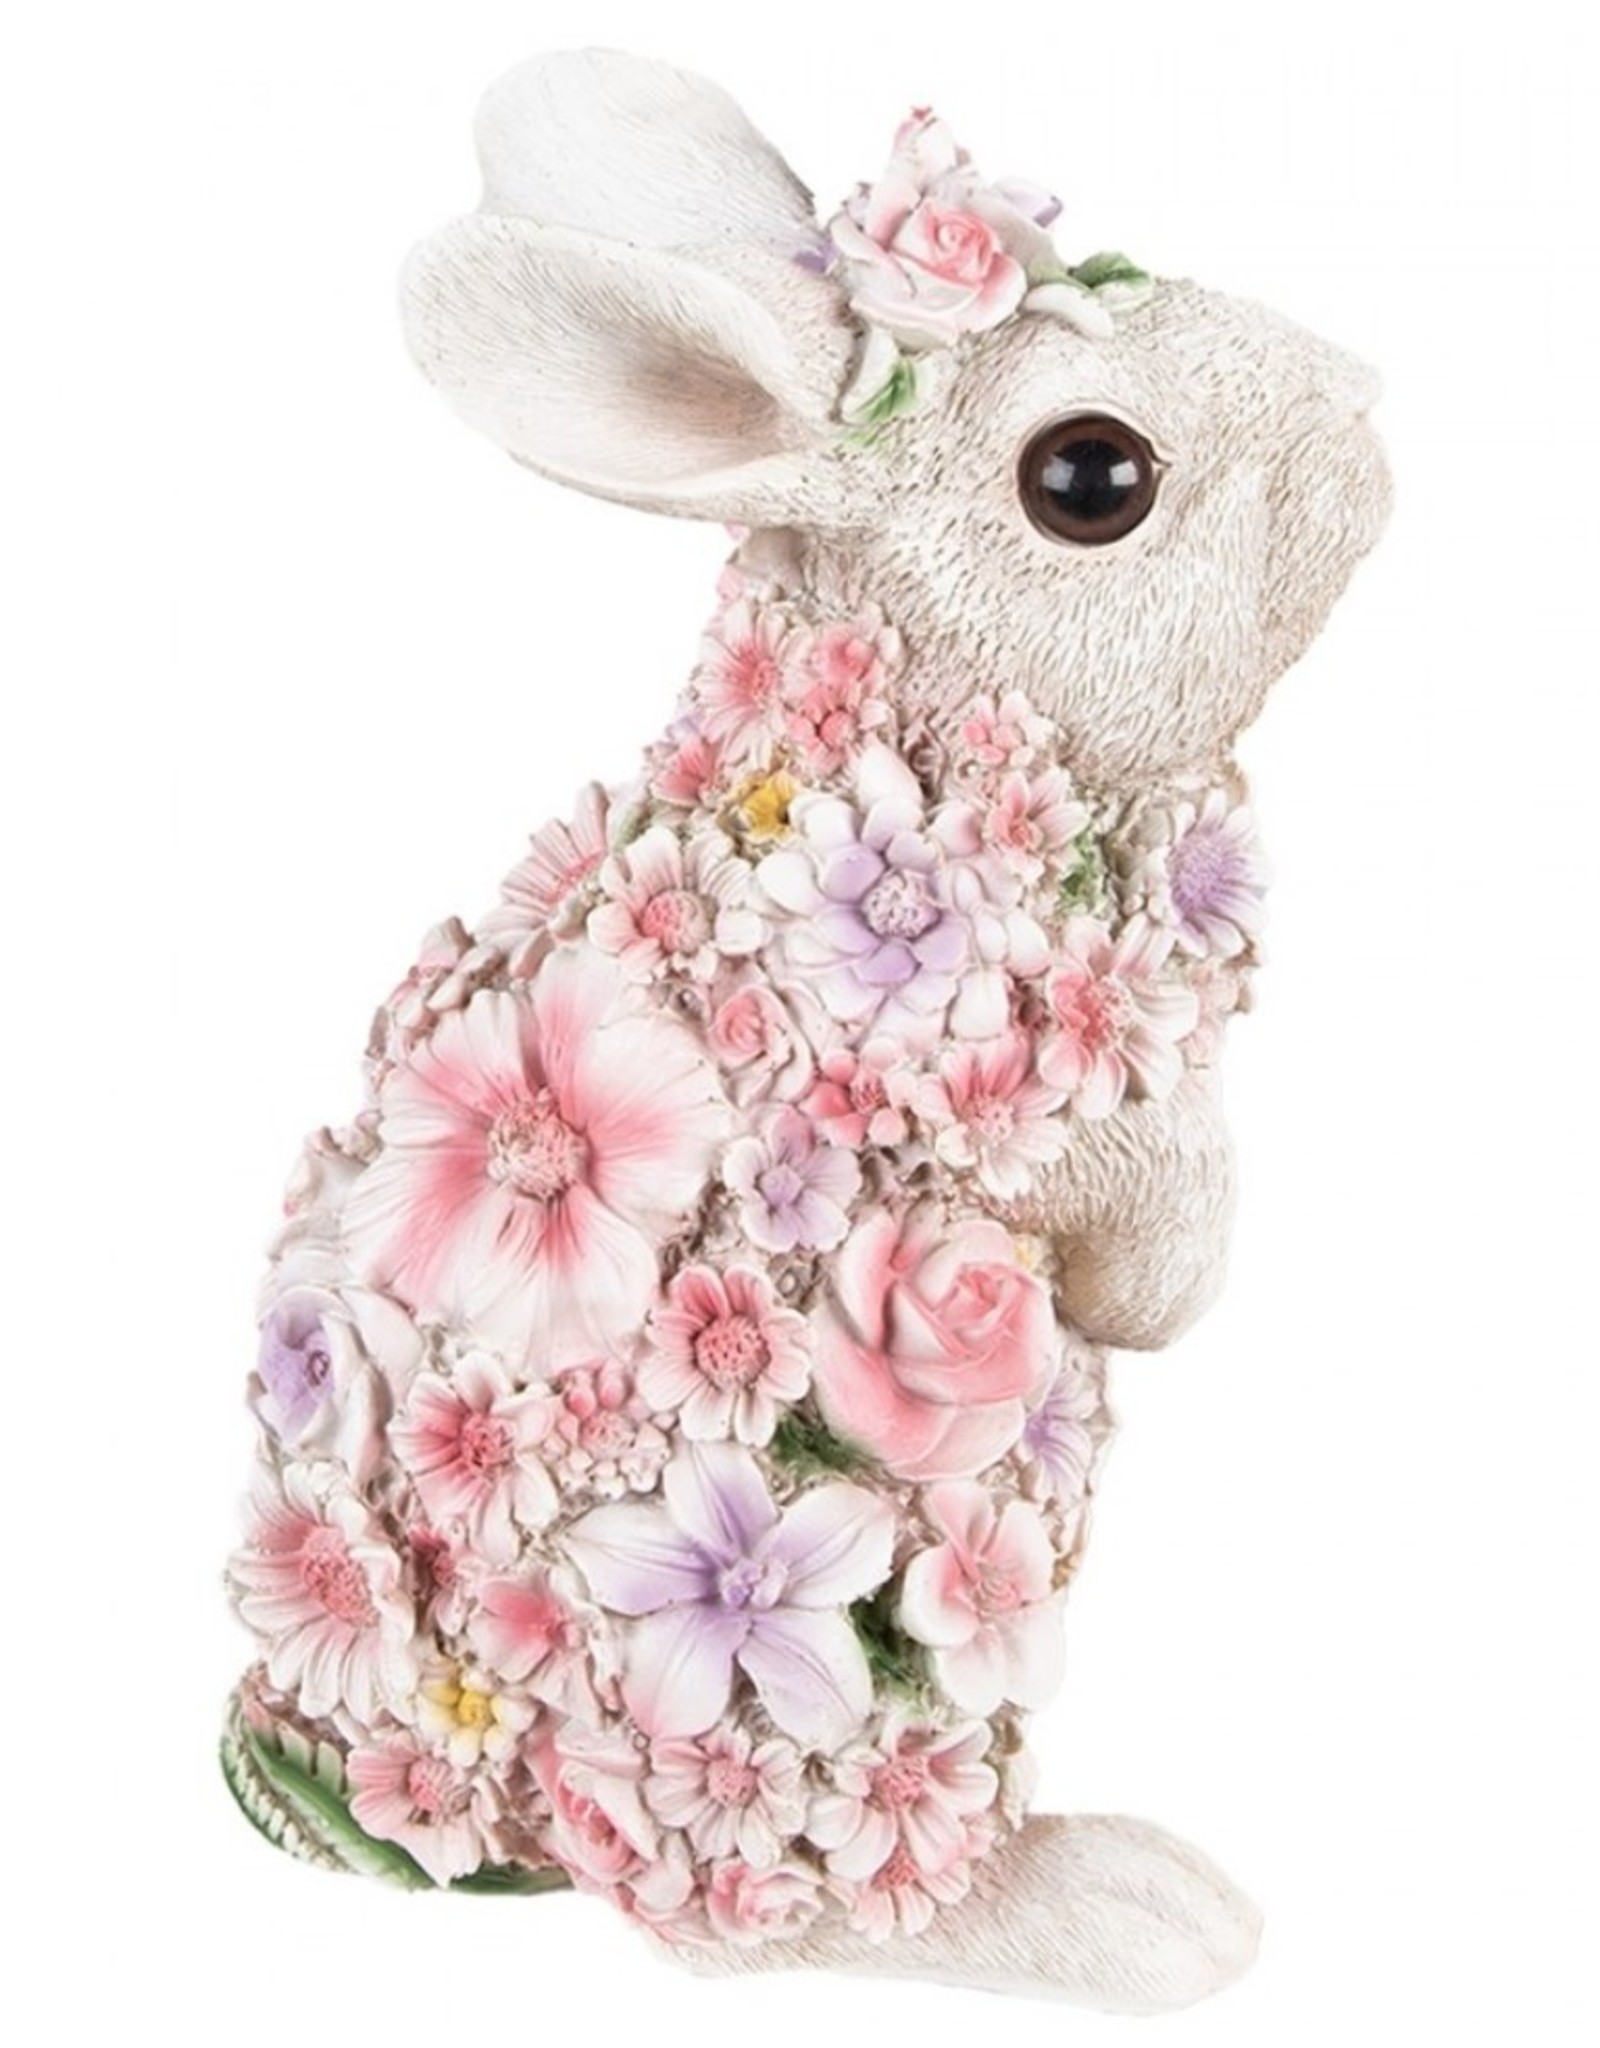 Trukado Giftware & Lifestyle - Bunny figurine decorated with Pink Flowers